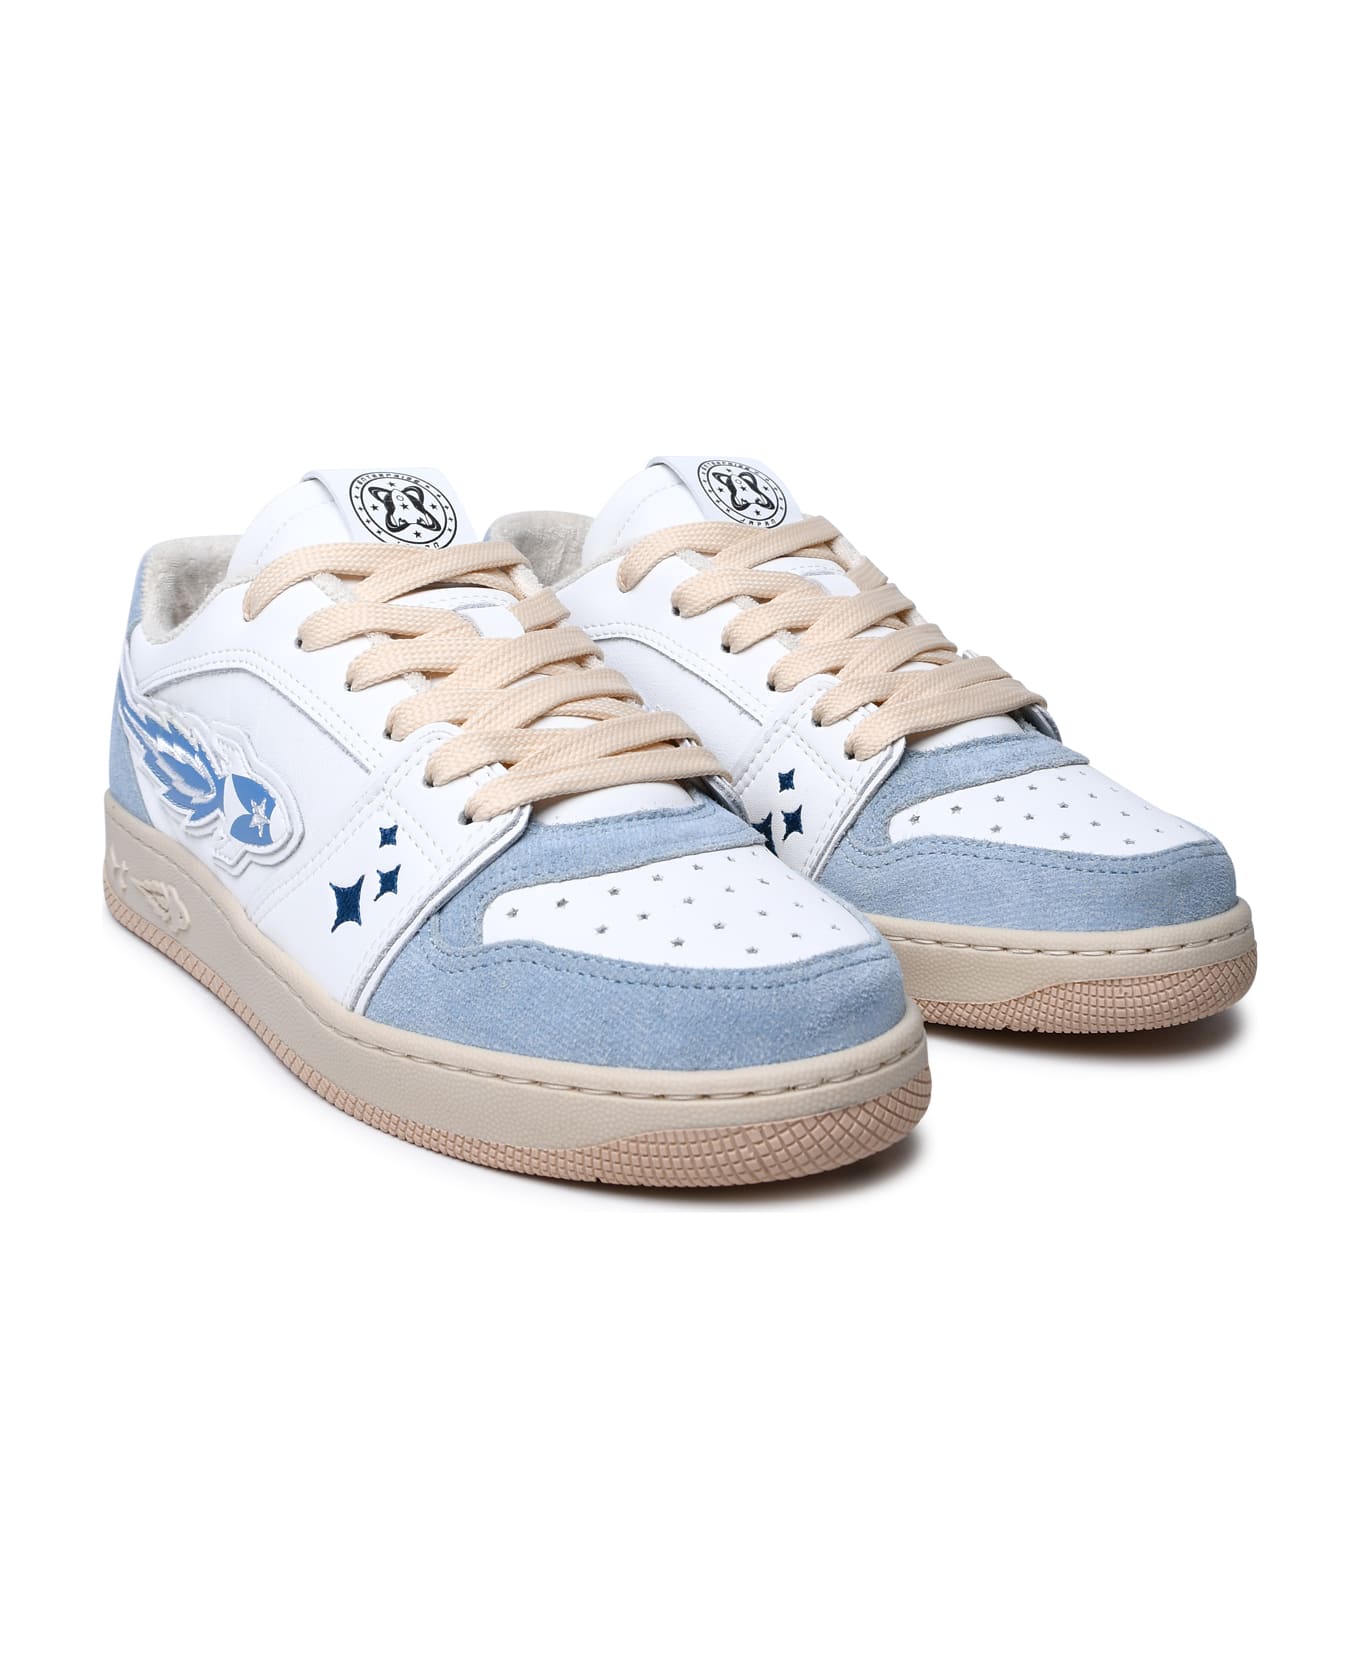 Enterprise Japan Two-tone Leather Sneakers - White スニーカー